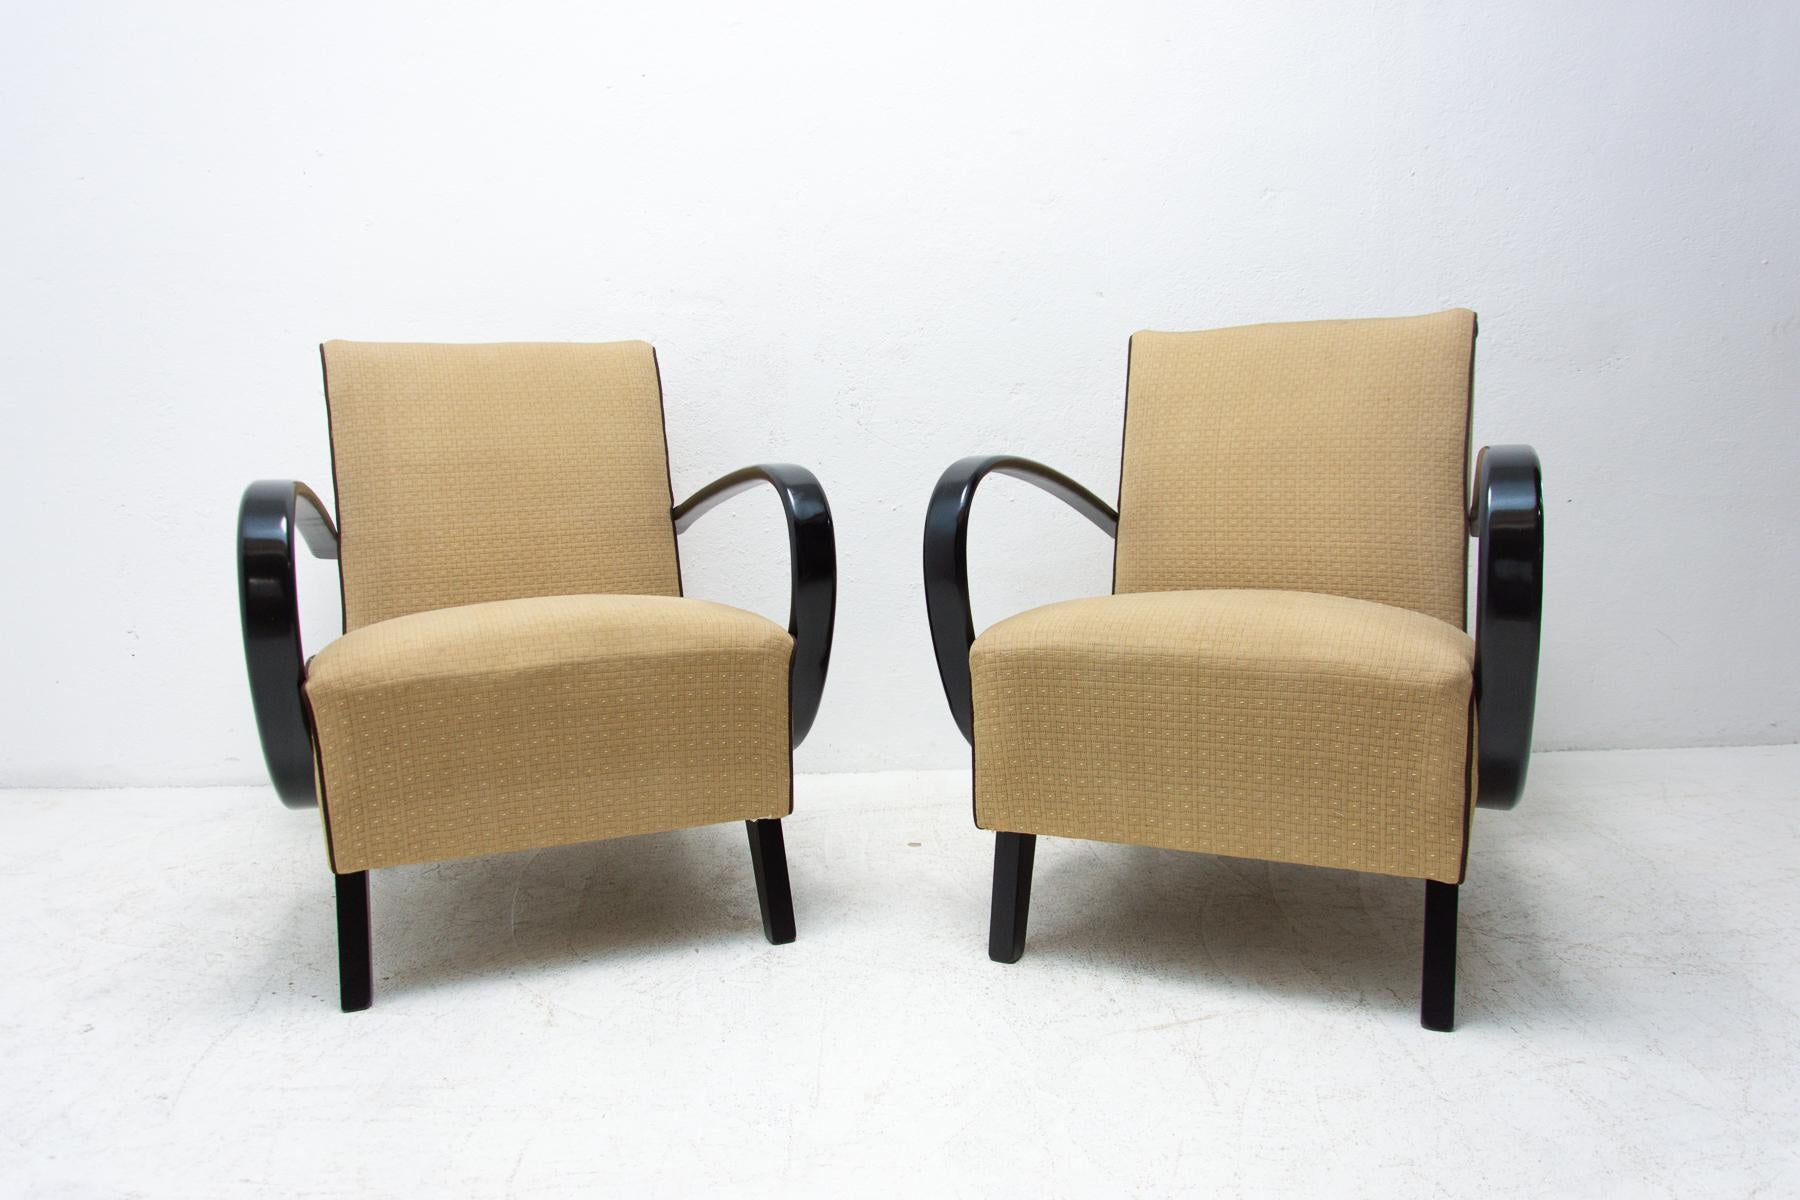 This pair of bentwood armchairs “C” was designed by Jindrich Halabala and were produced by UP Závody in the 1950´s. The chairs are stable and comfortable and in very good condition, the wood was lacquered black in the past. Price is for the